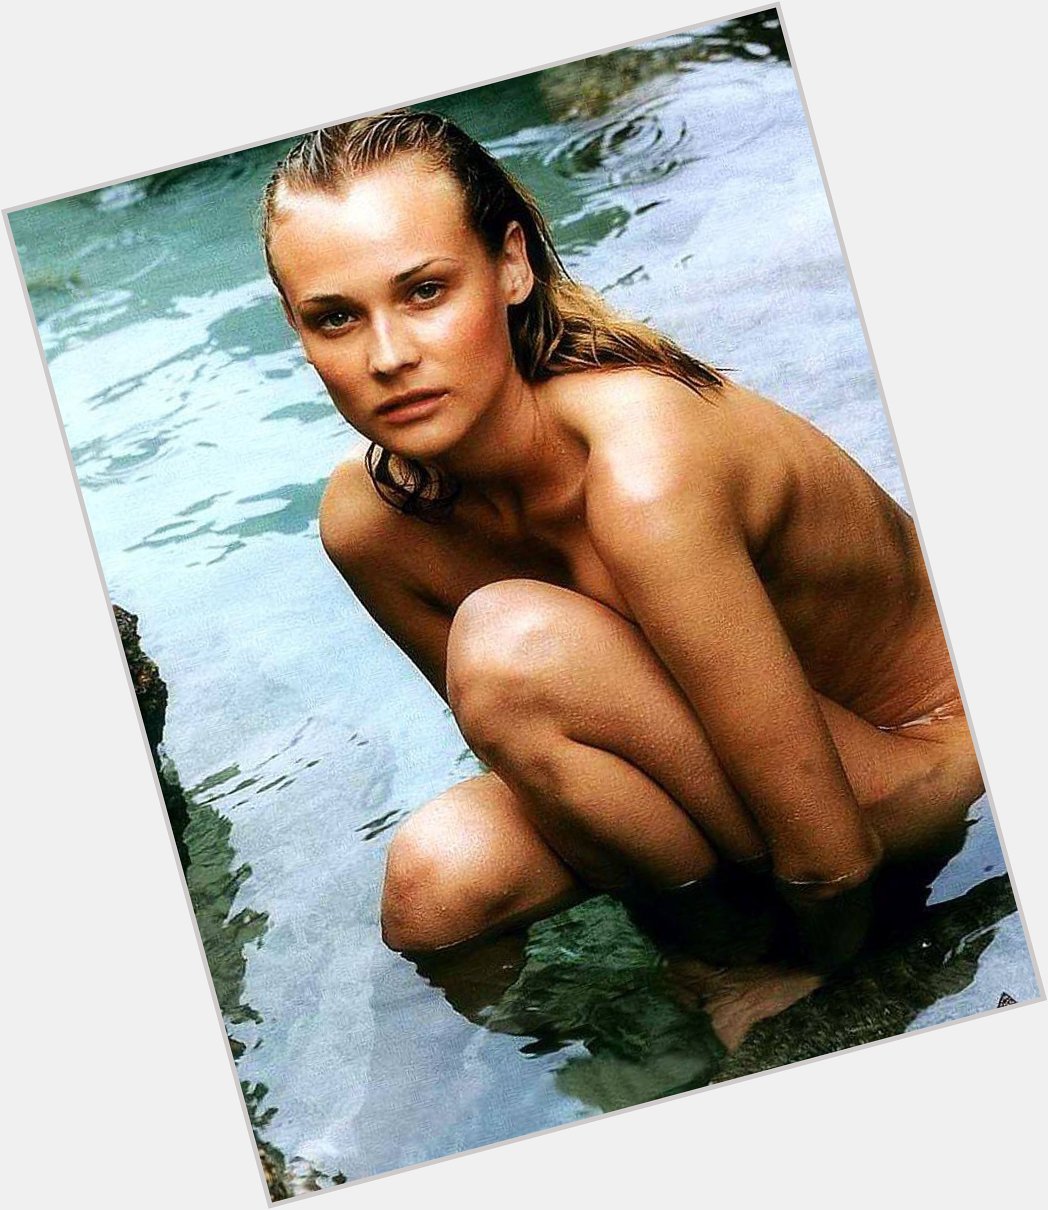 Happy Birthday to Diane Kruger who turns 43 today!  Pictured here in her birthday suit. 